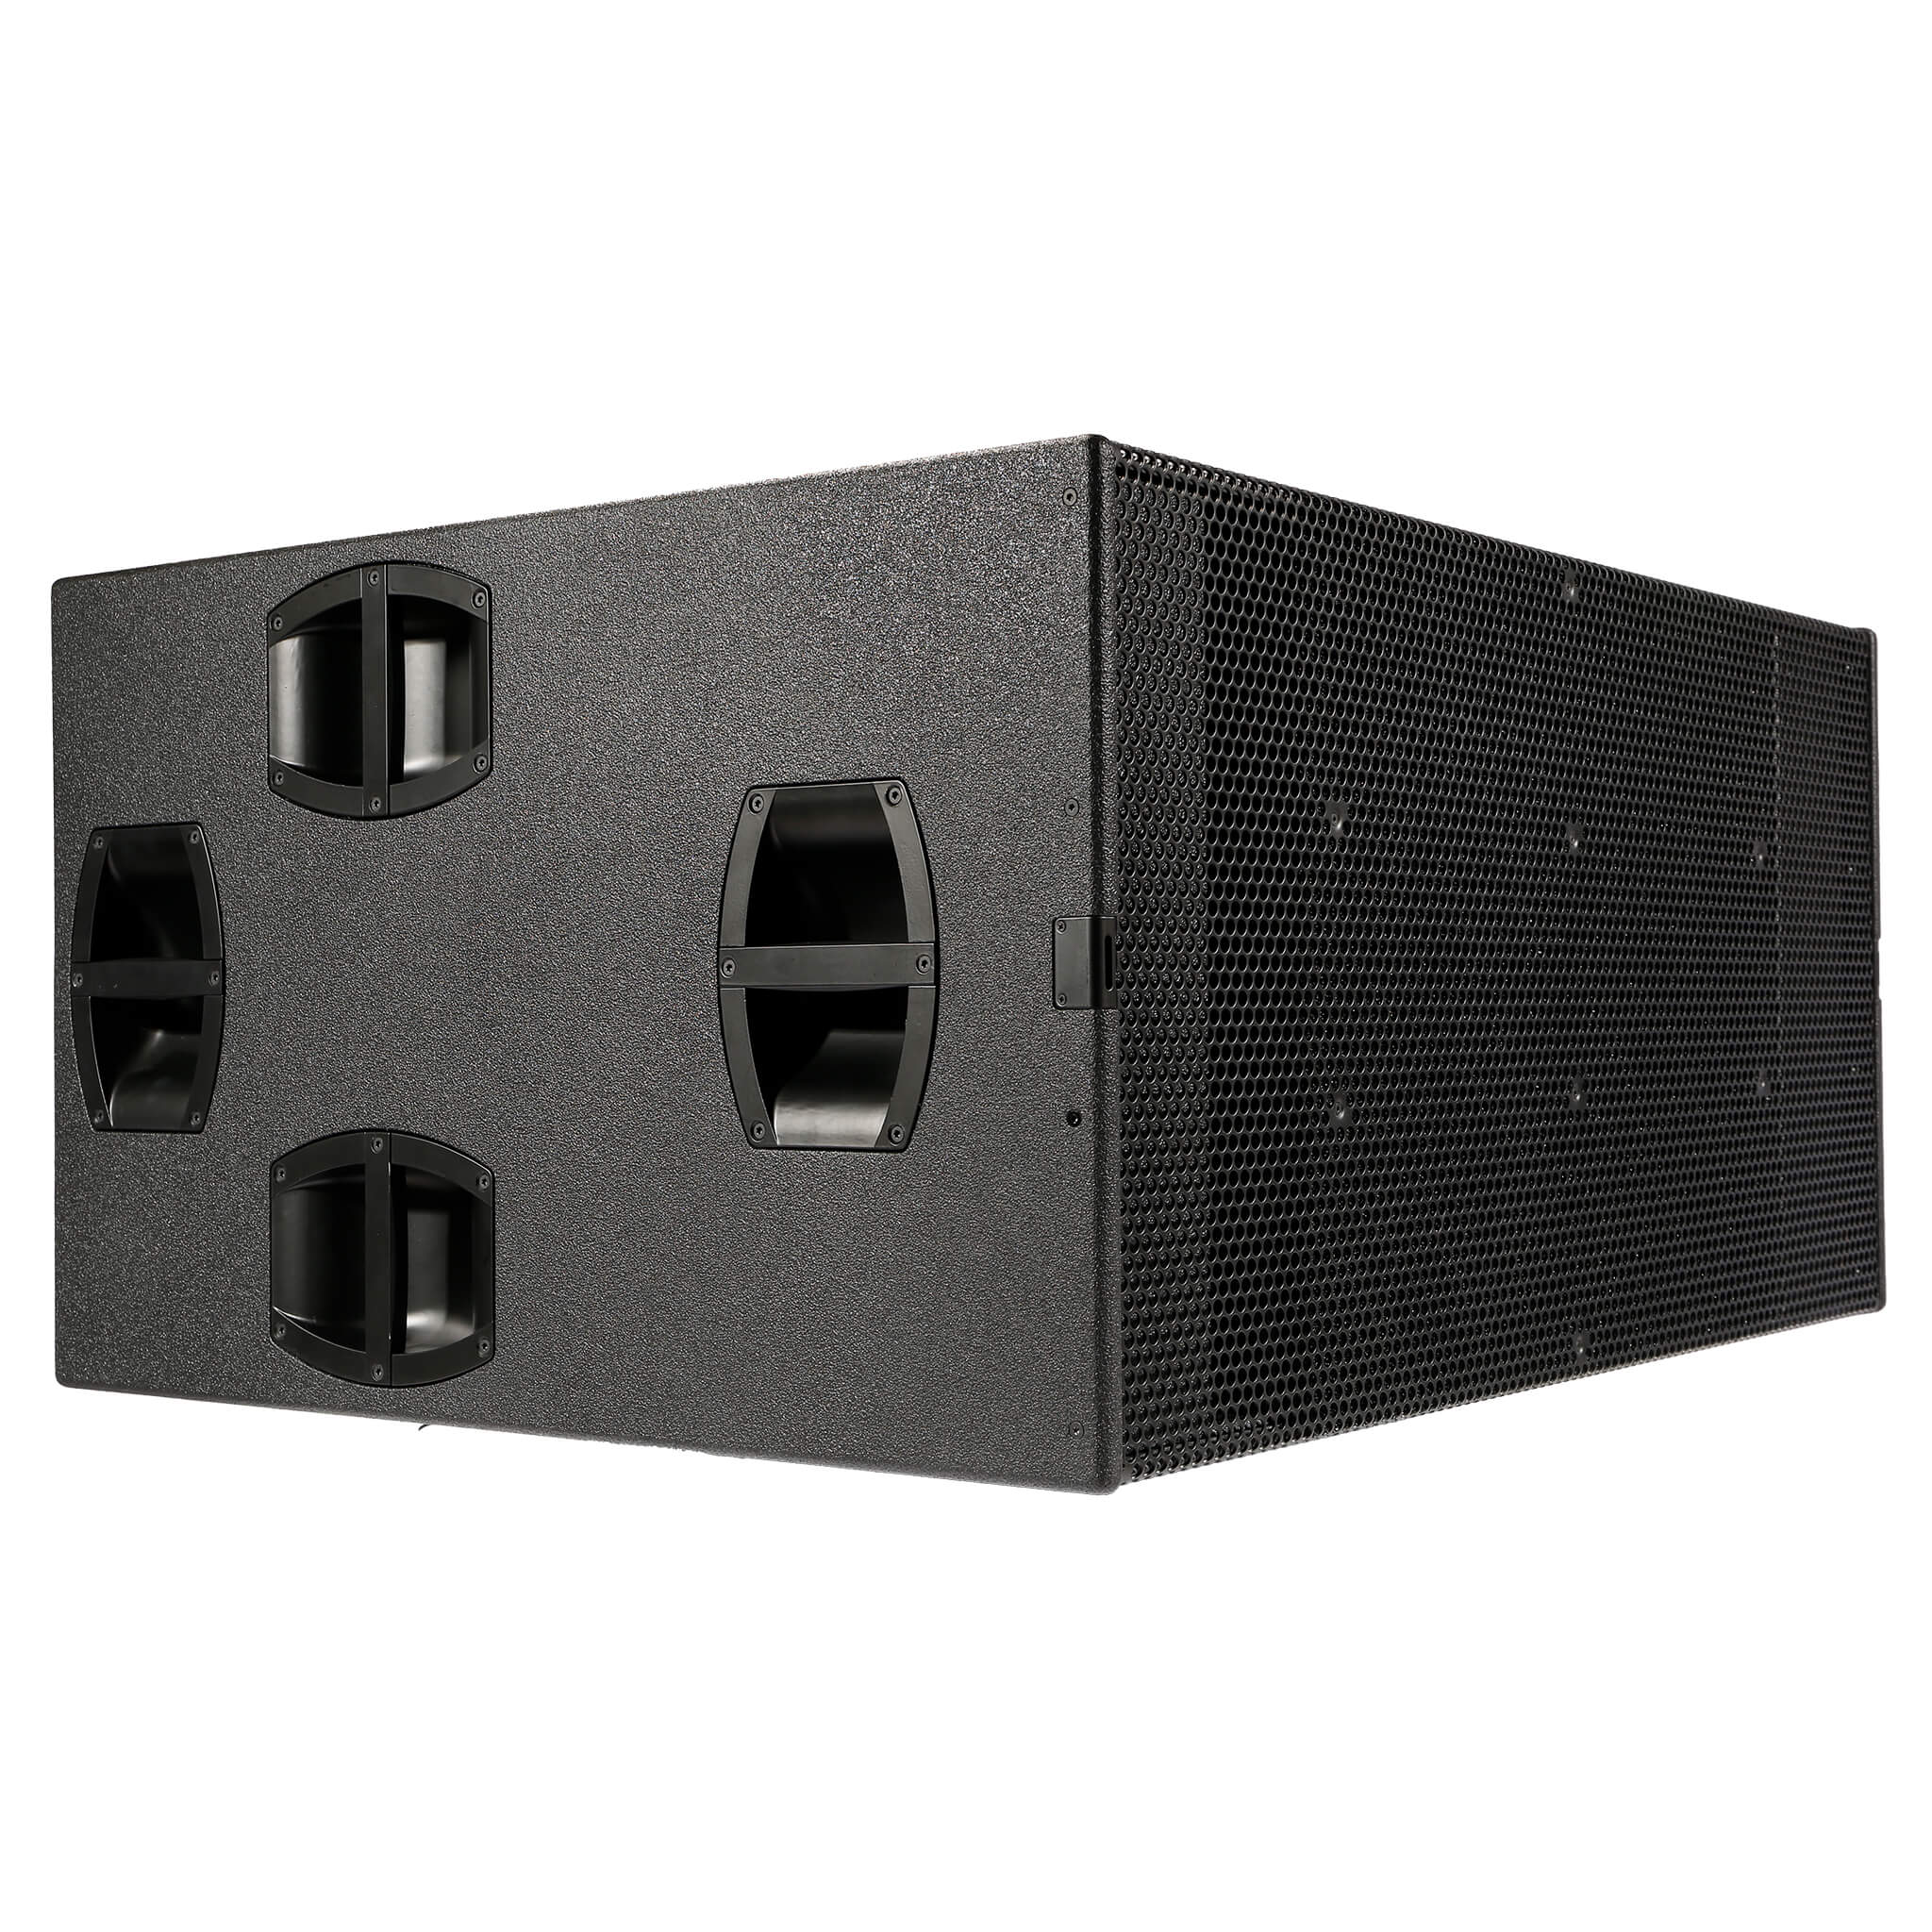 B22 Subwooferhigh Performance Subwoofer Intended For Ground Stacked Applications